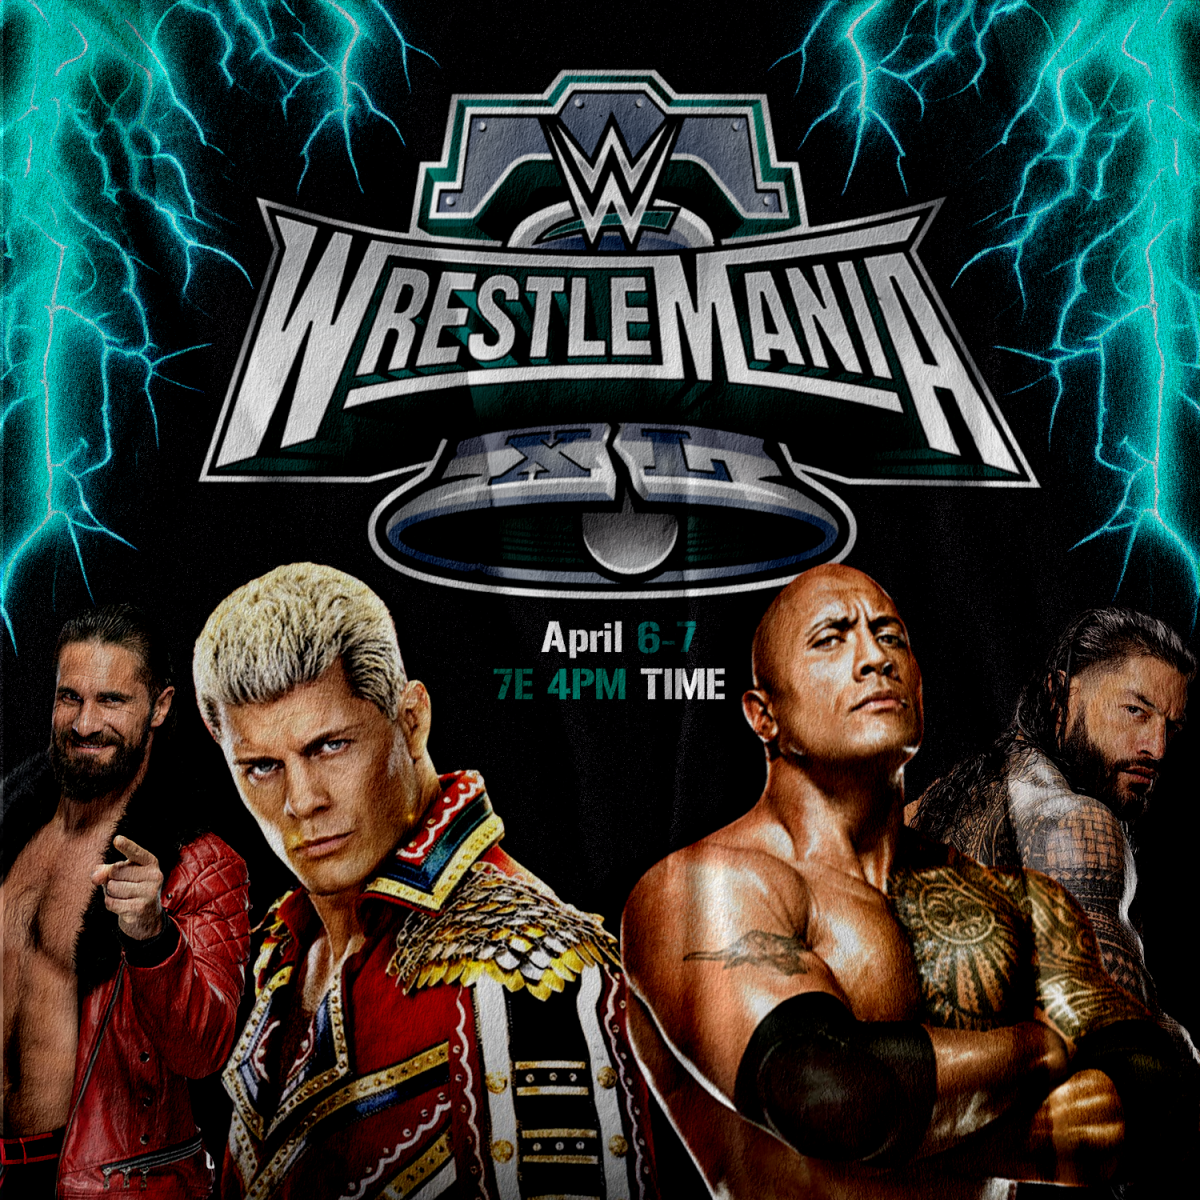 Digitally created a wrestlemania xl Ad that has a lightening boarder on top, the wrestlemania logo in the center, below is the date and time. Below are wrestlers; The Rock, Roman Reins, Cody Rhodes, and Seth Rollins.